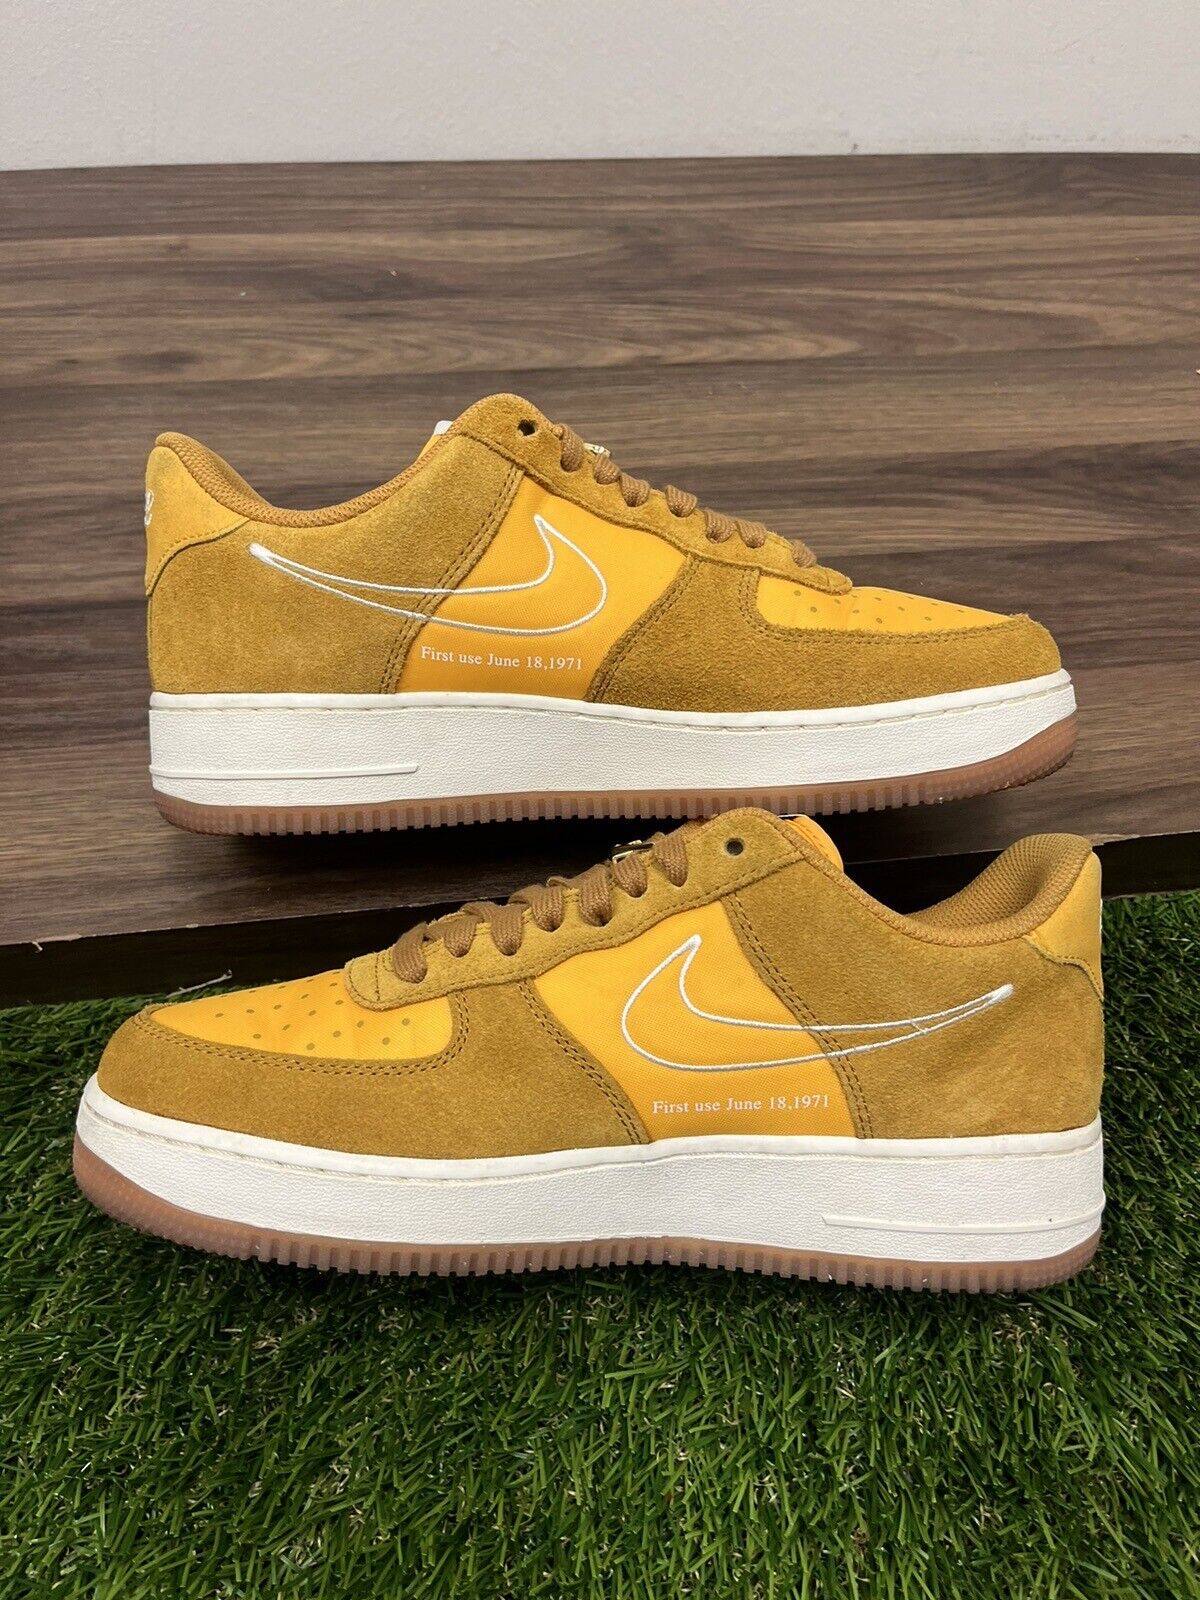 Nike Air Force 1 ‘07 SE First Use Gold Yellow Suede DA8302-700 Women’s Size 10.5